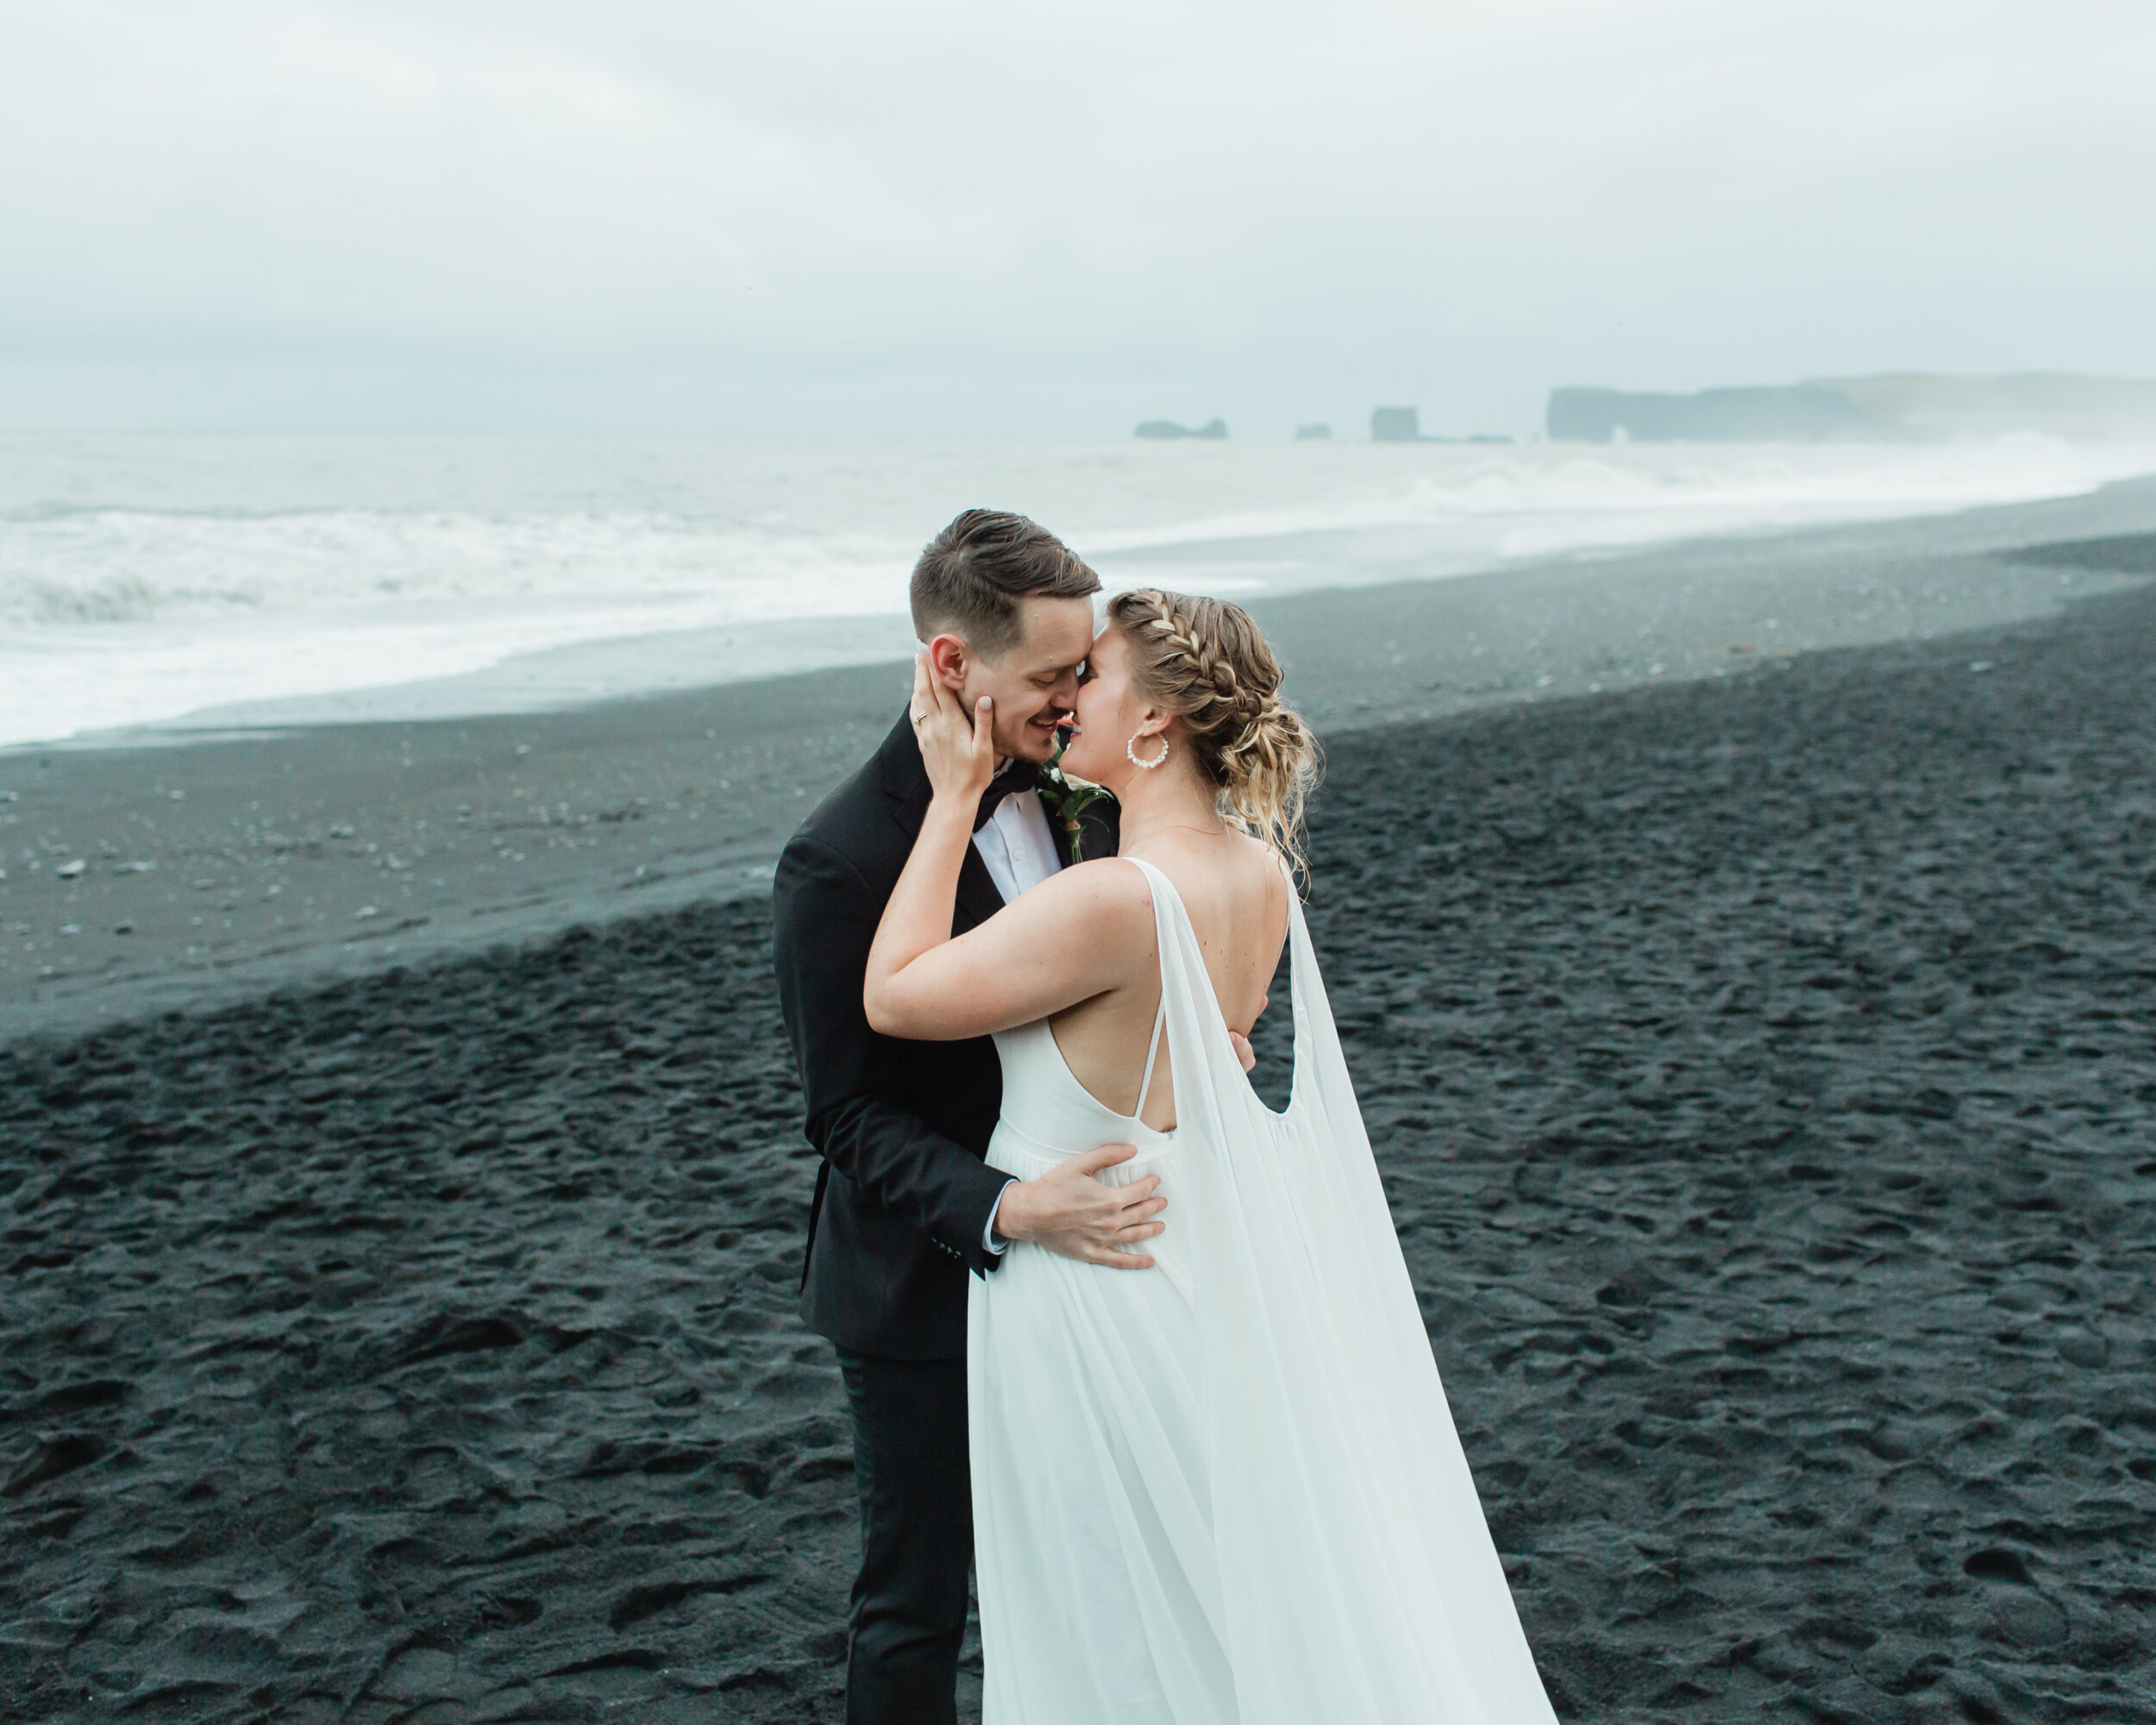 A bride goes into kiss her groom on a black, sandy beach in Southern Iceland.